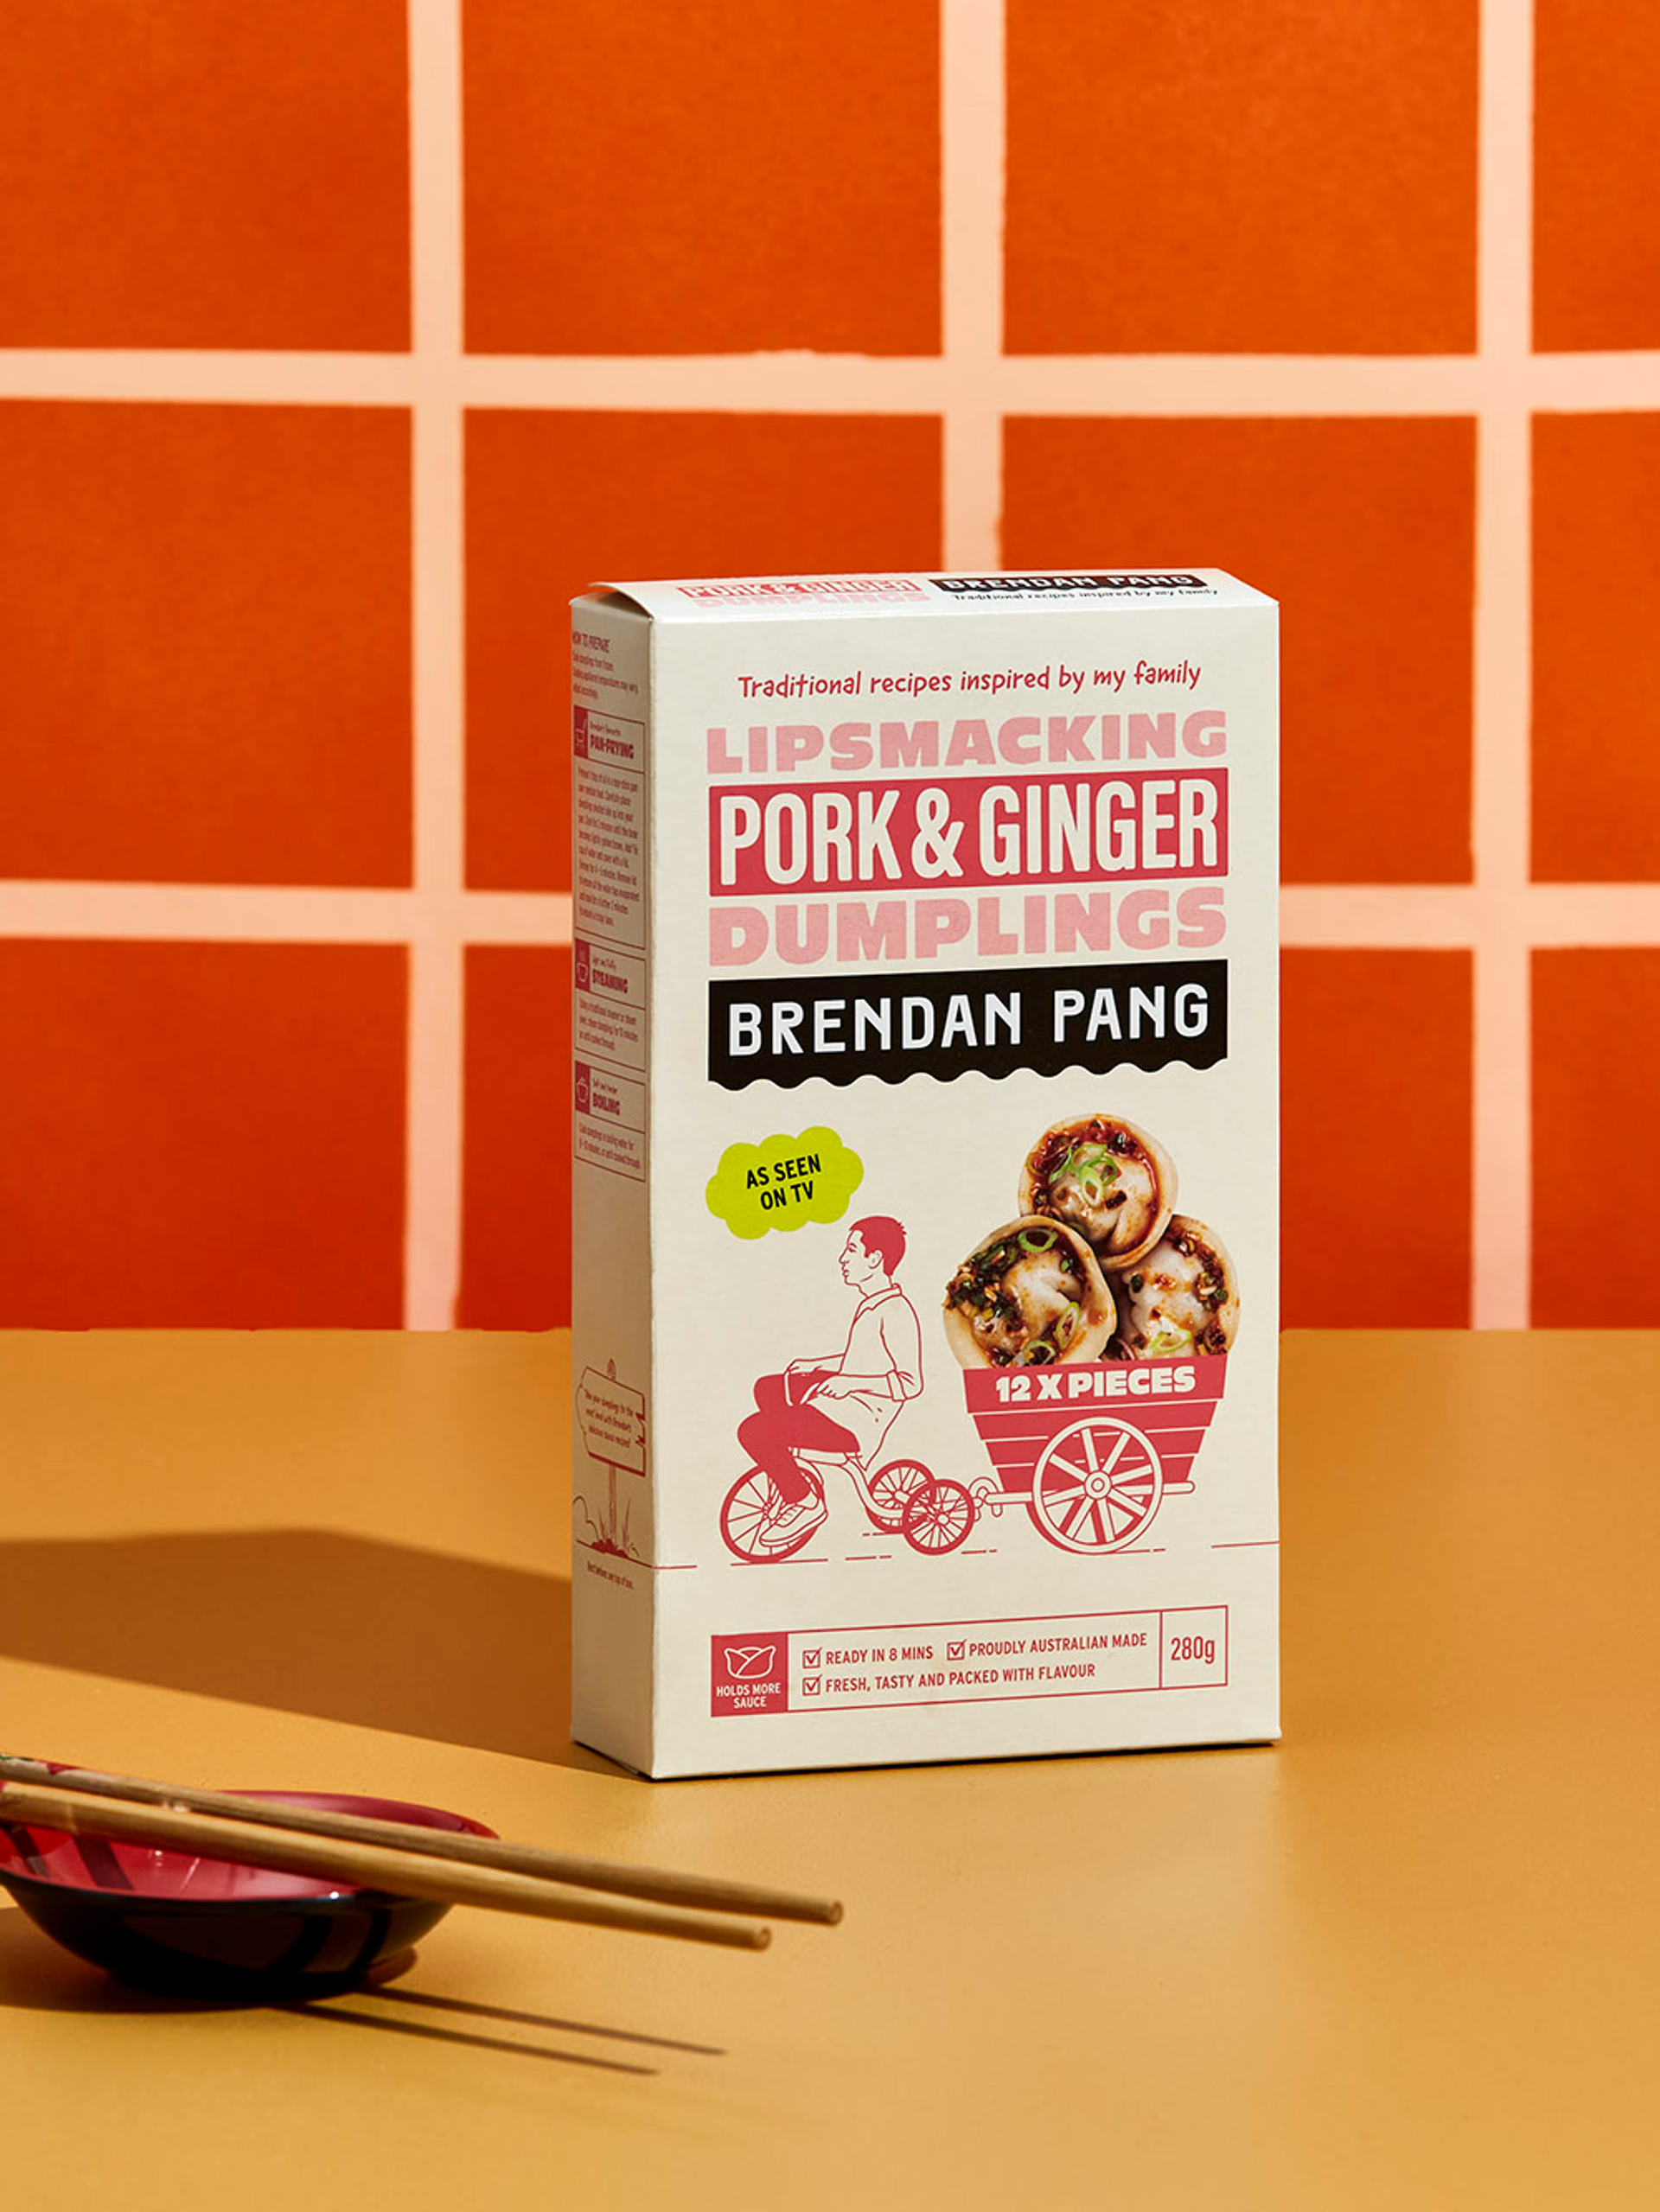 Pork dumplings packaging design in a bright, orange tiled kitchen featuring brand identity and design for Brendan Pang created by branding agency Our Revolution